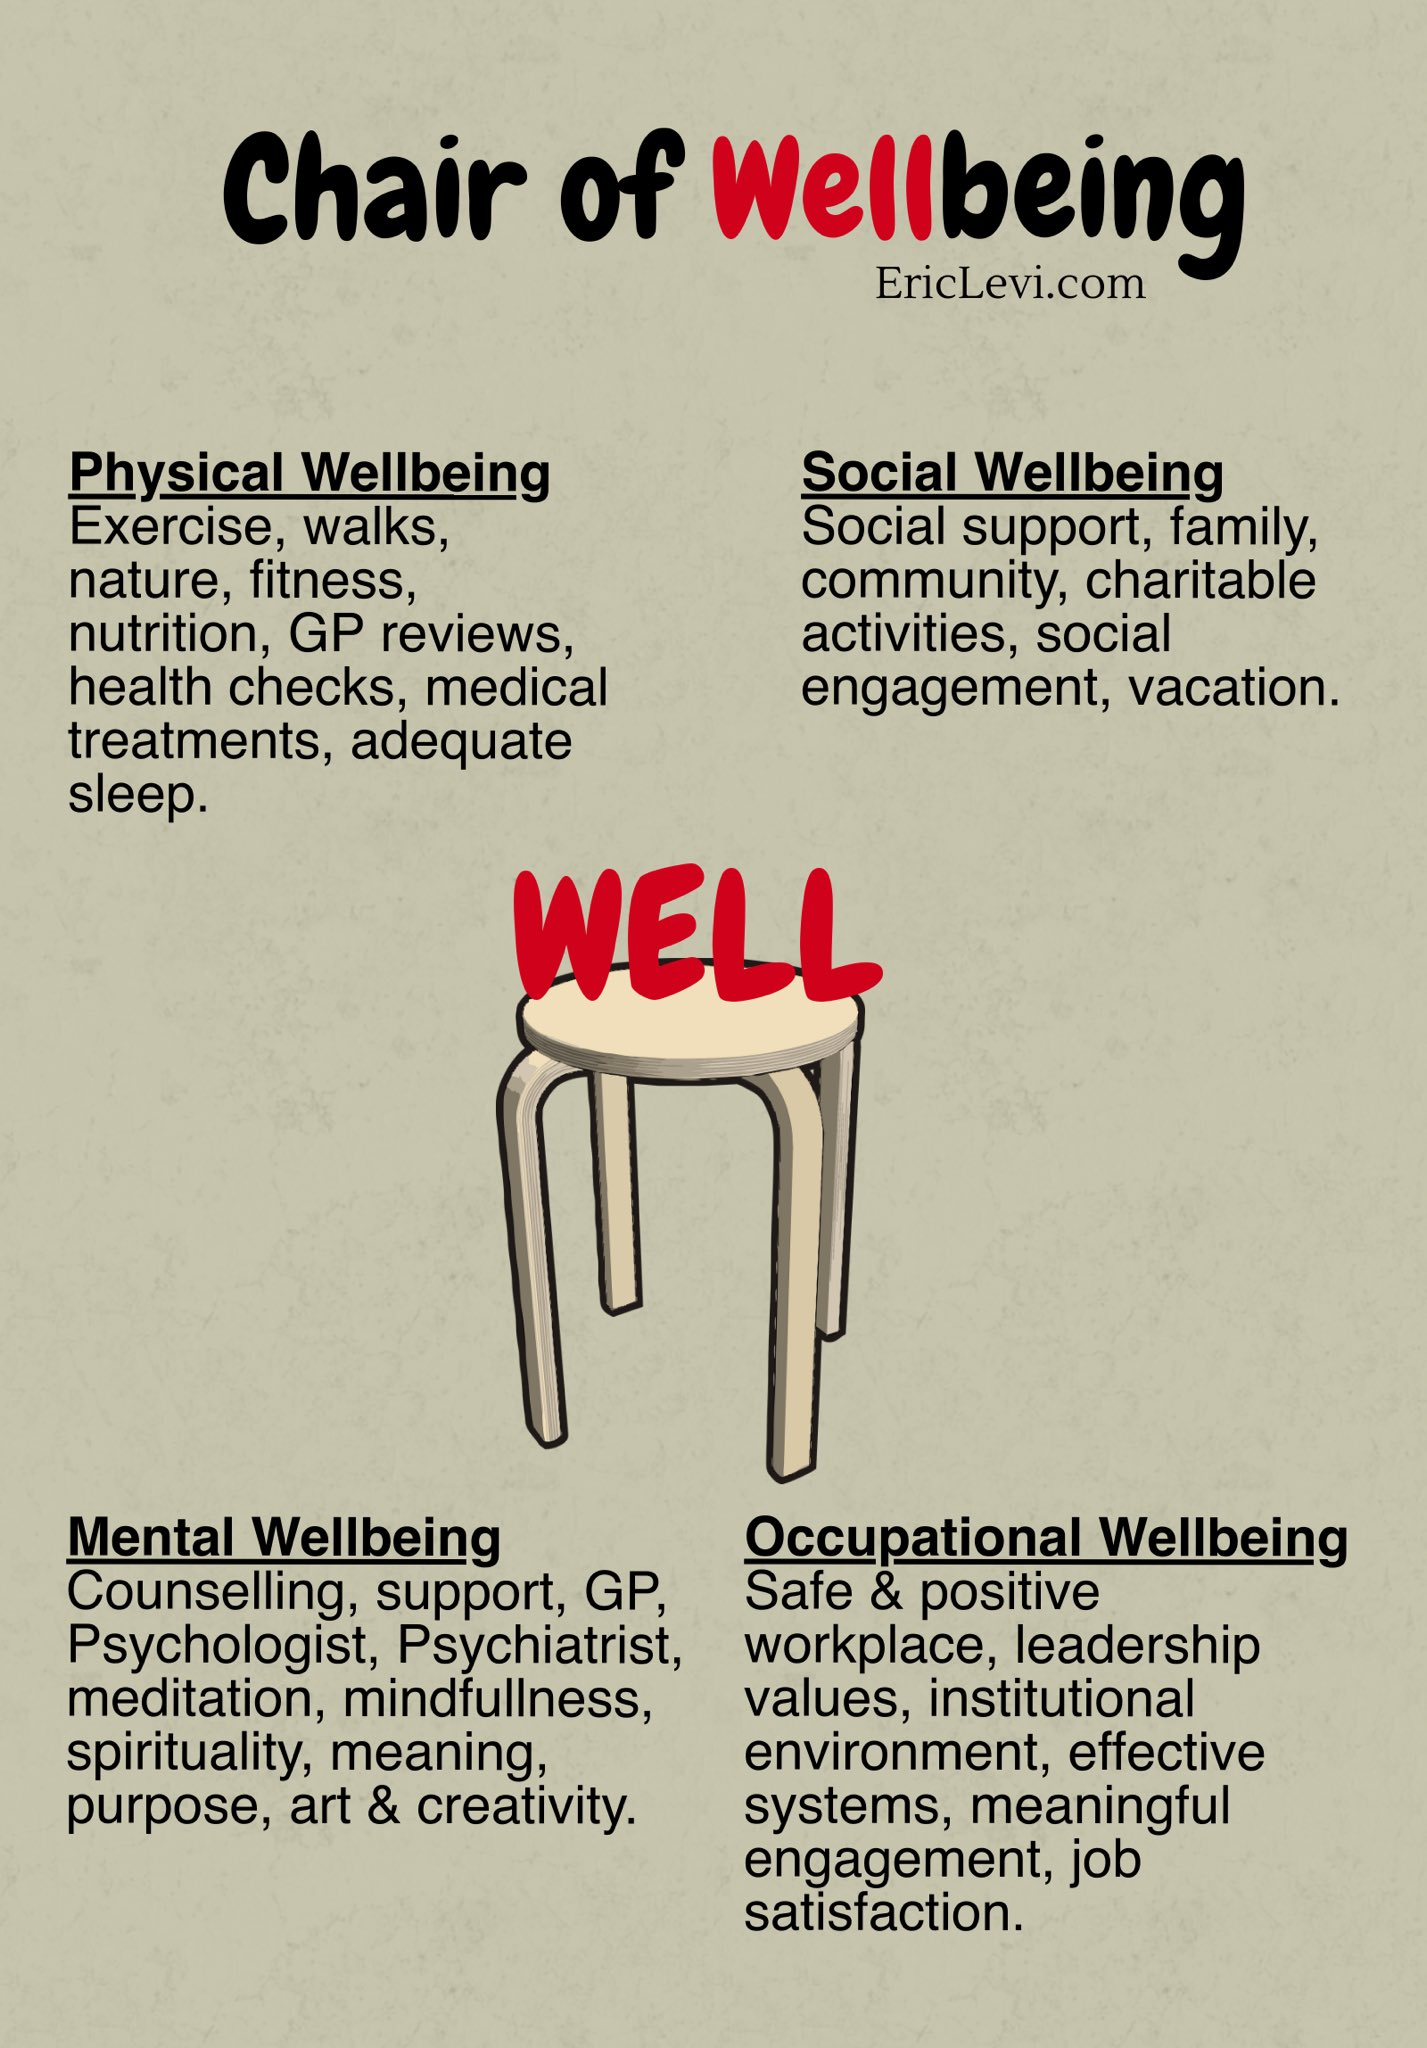 Chair of well-being image